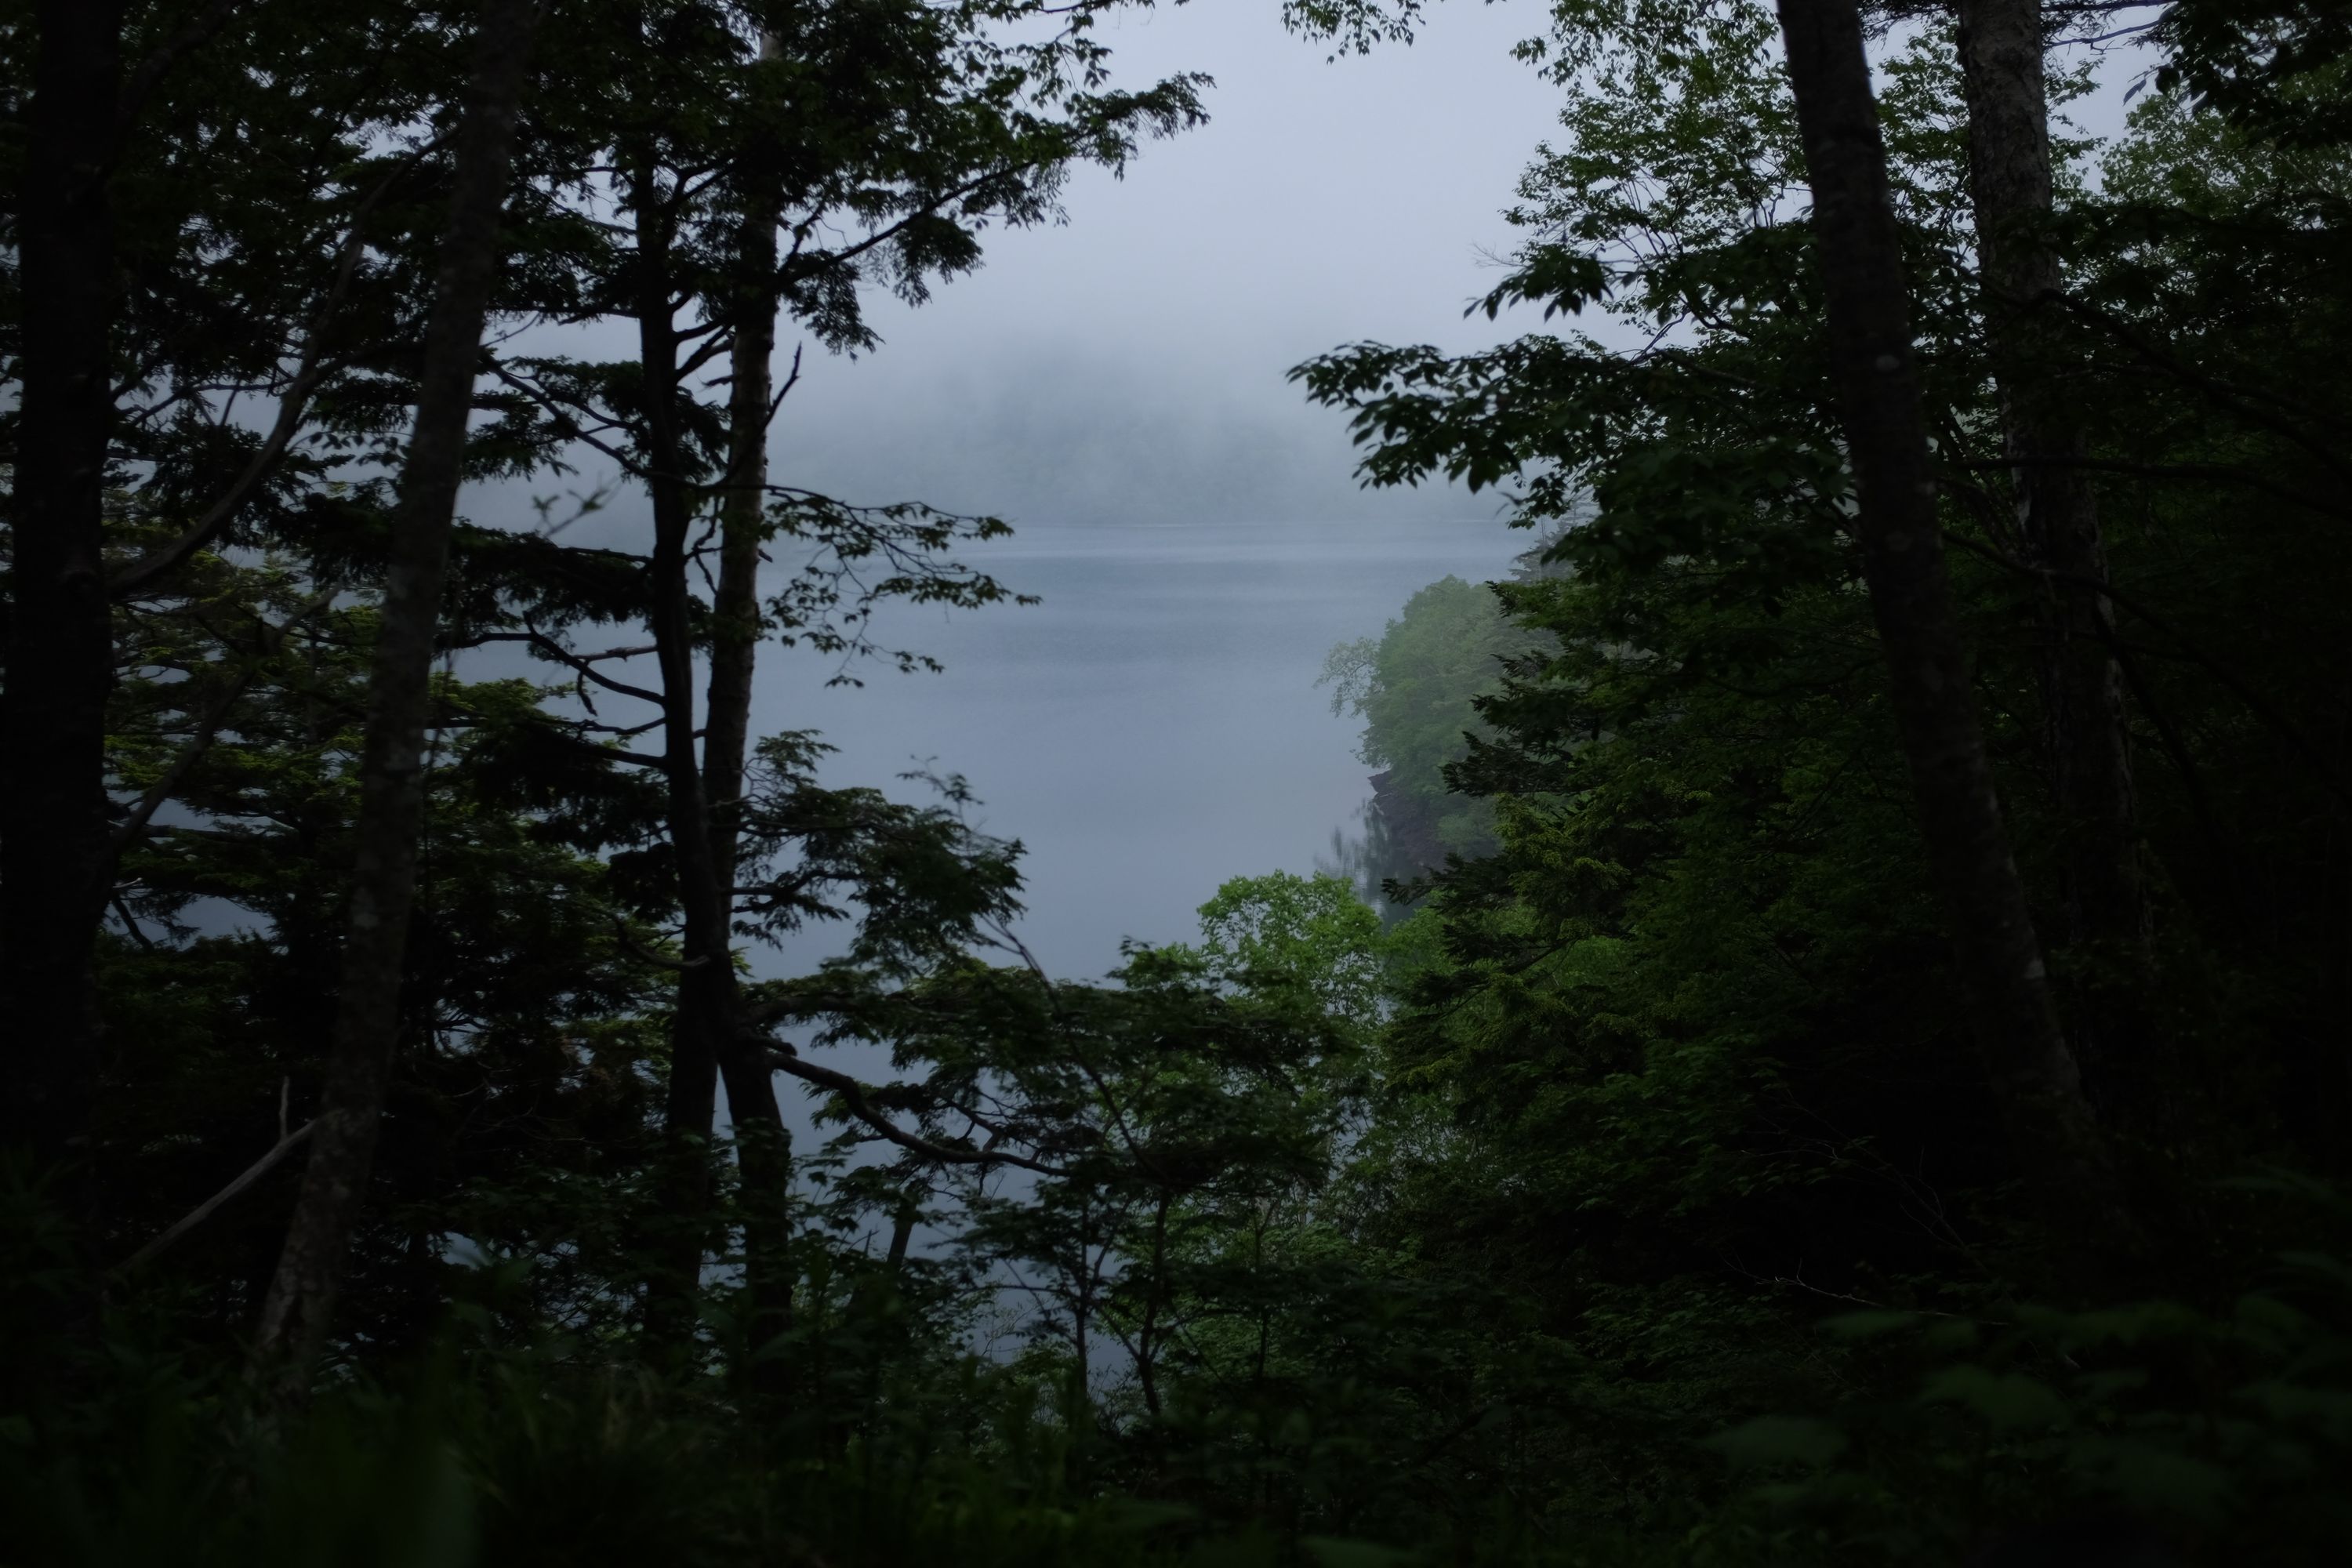 A view of a lake through a forest.